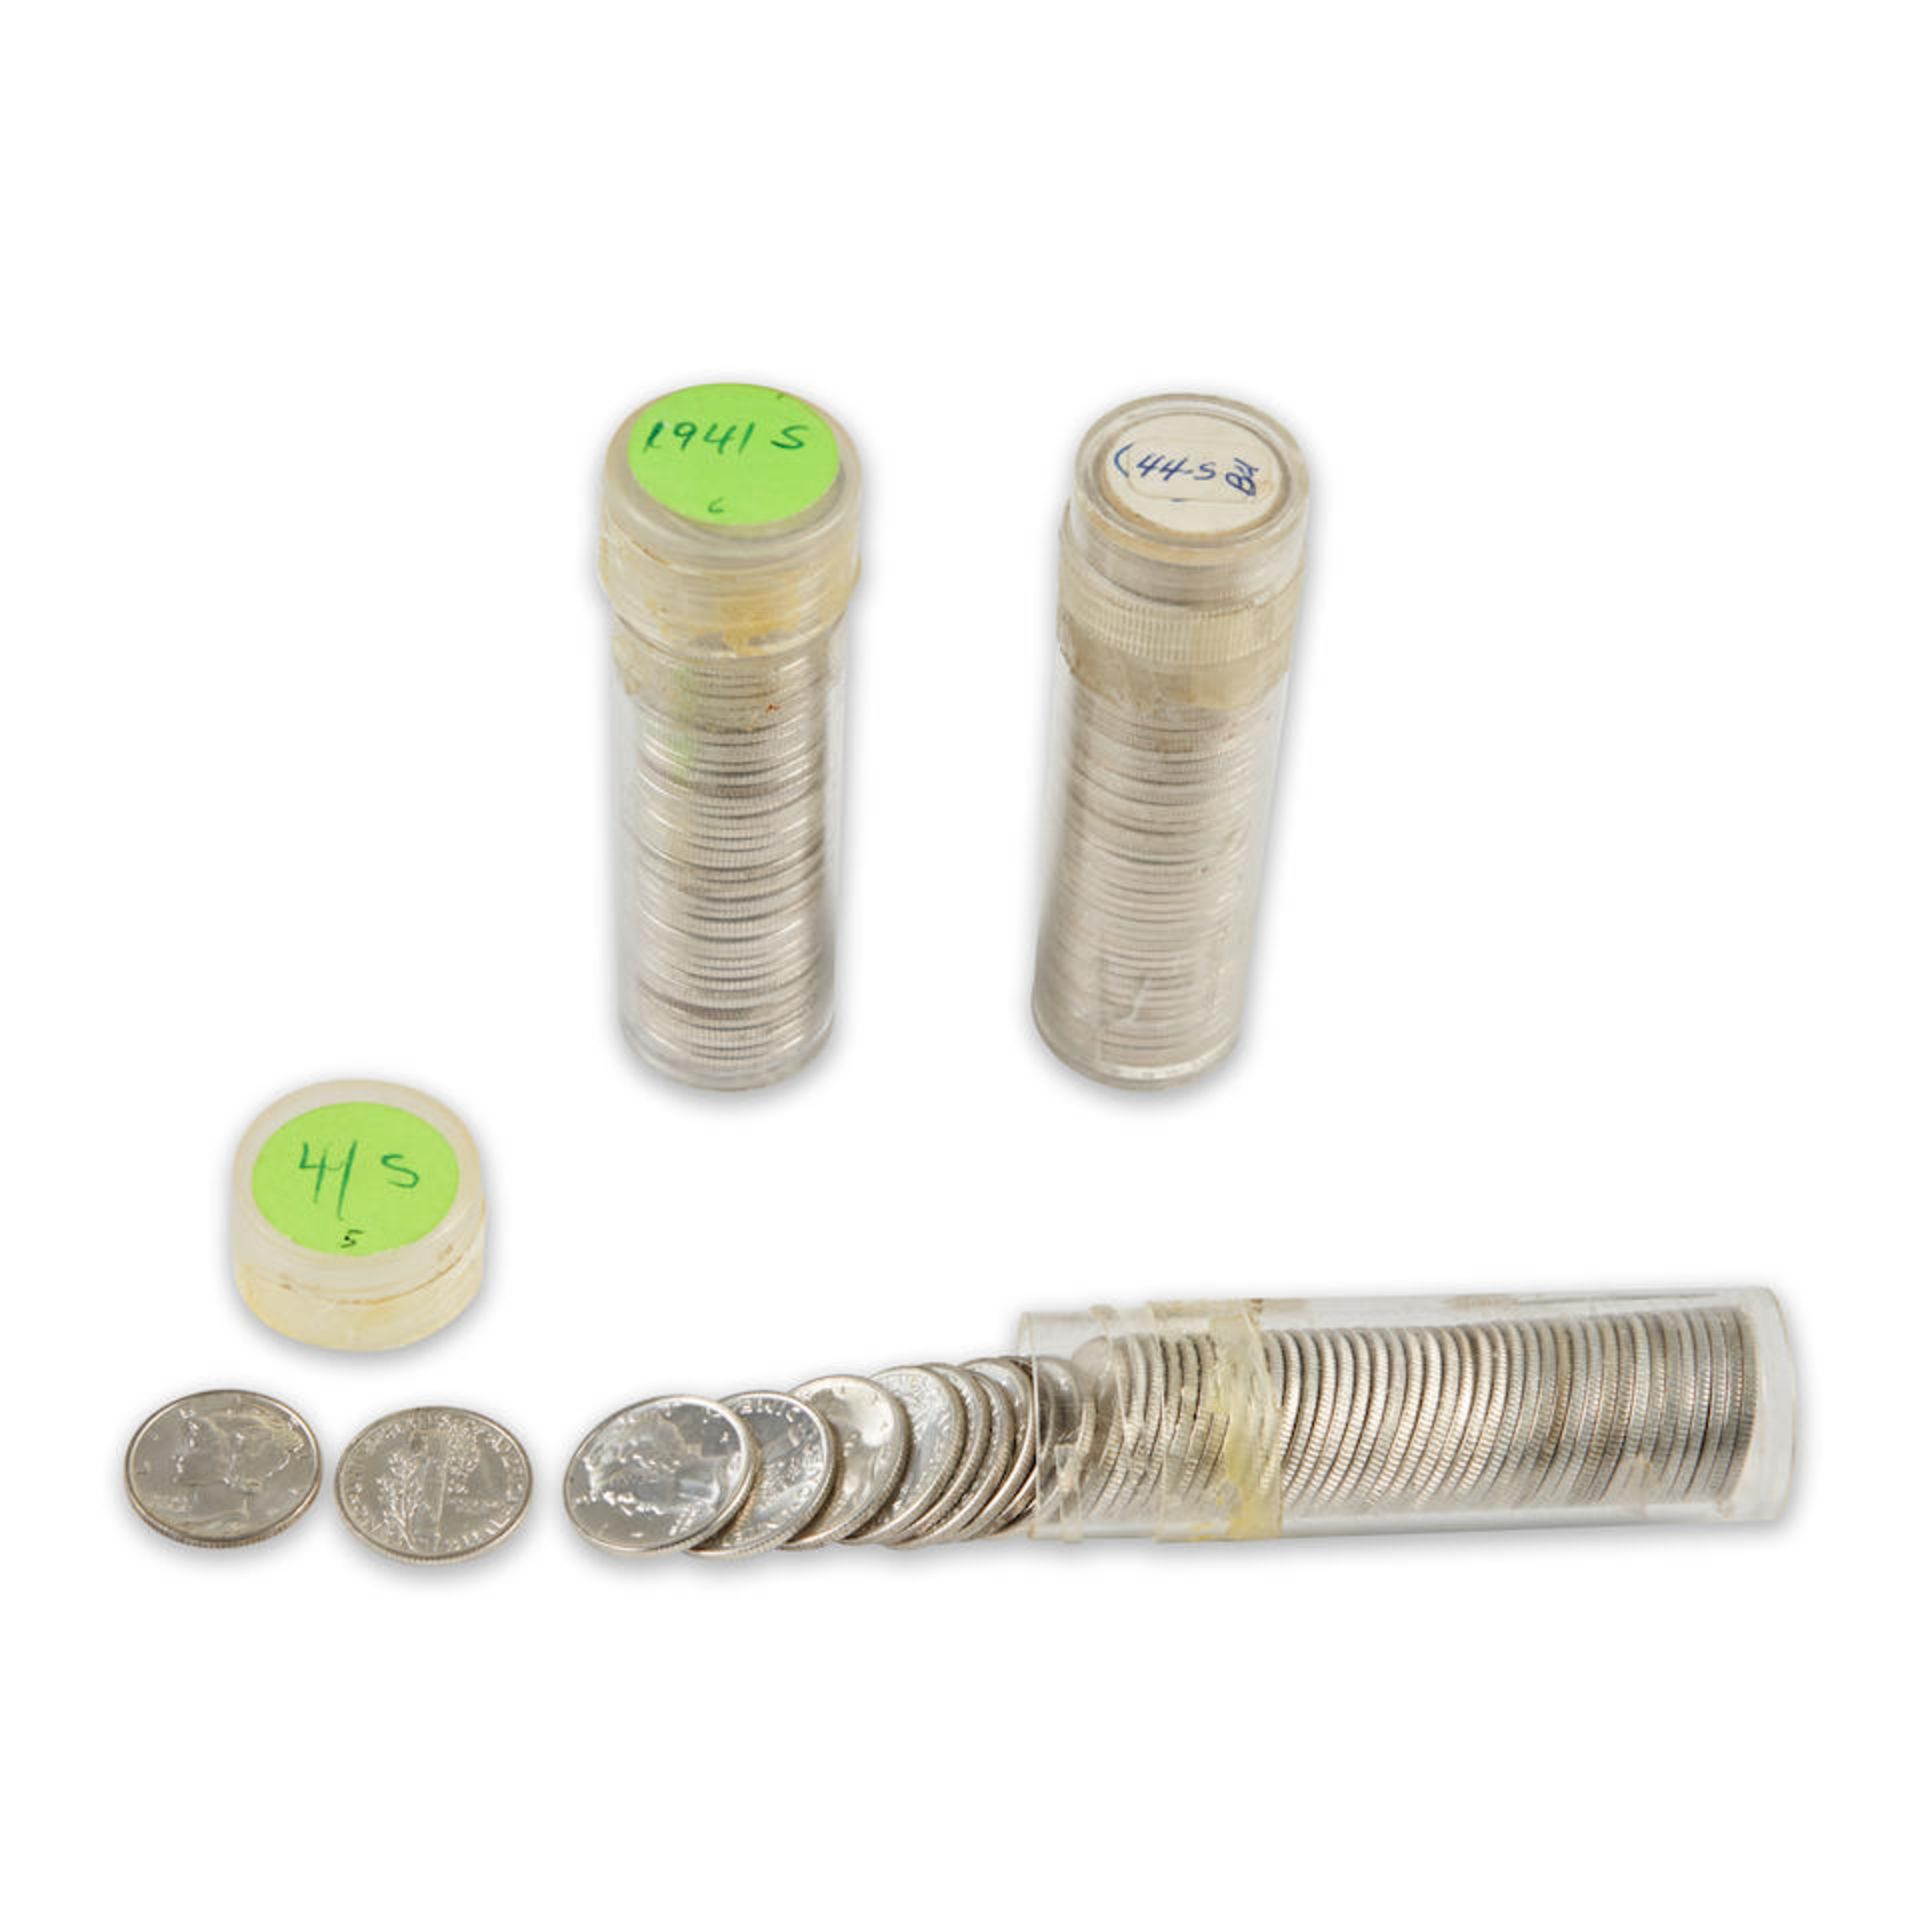 United States Three Mercury Dime Uncirculated/Brilliant Uncirculated Coin Rolls.